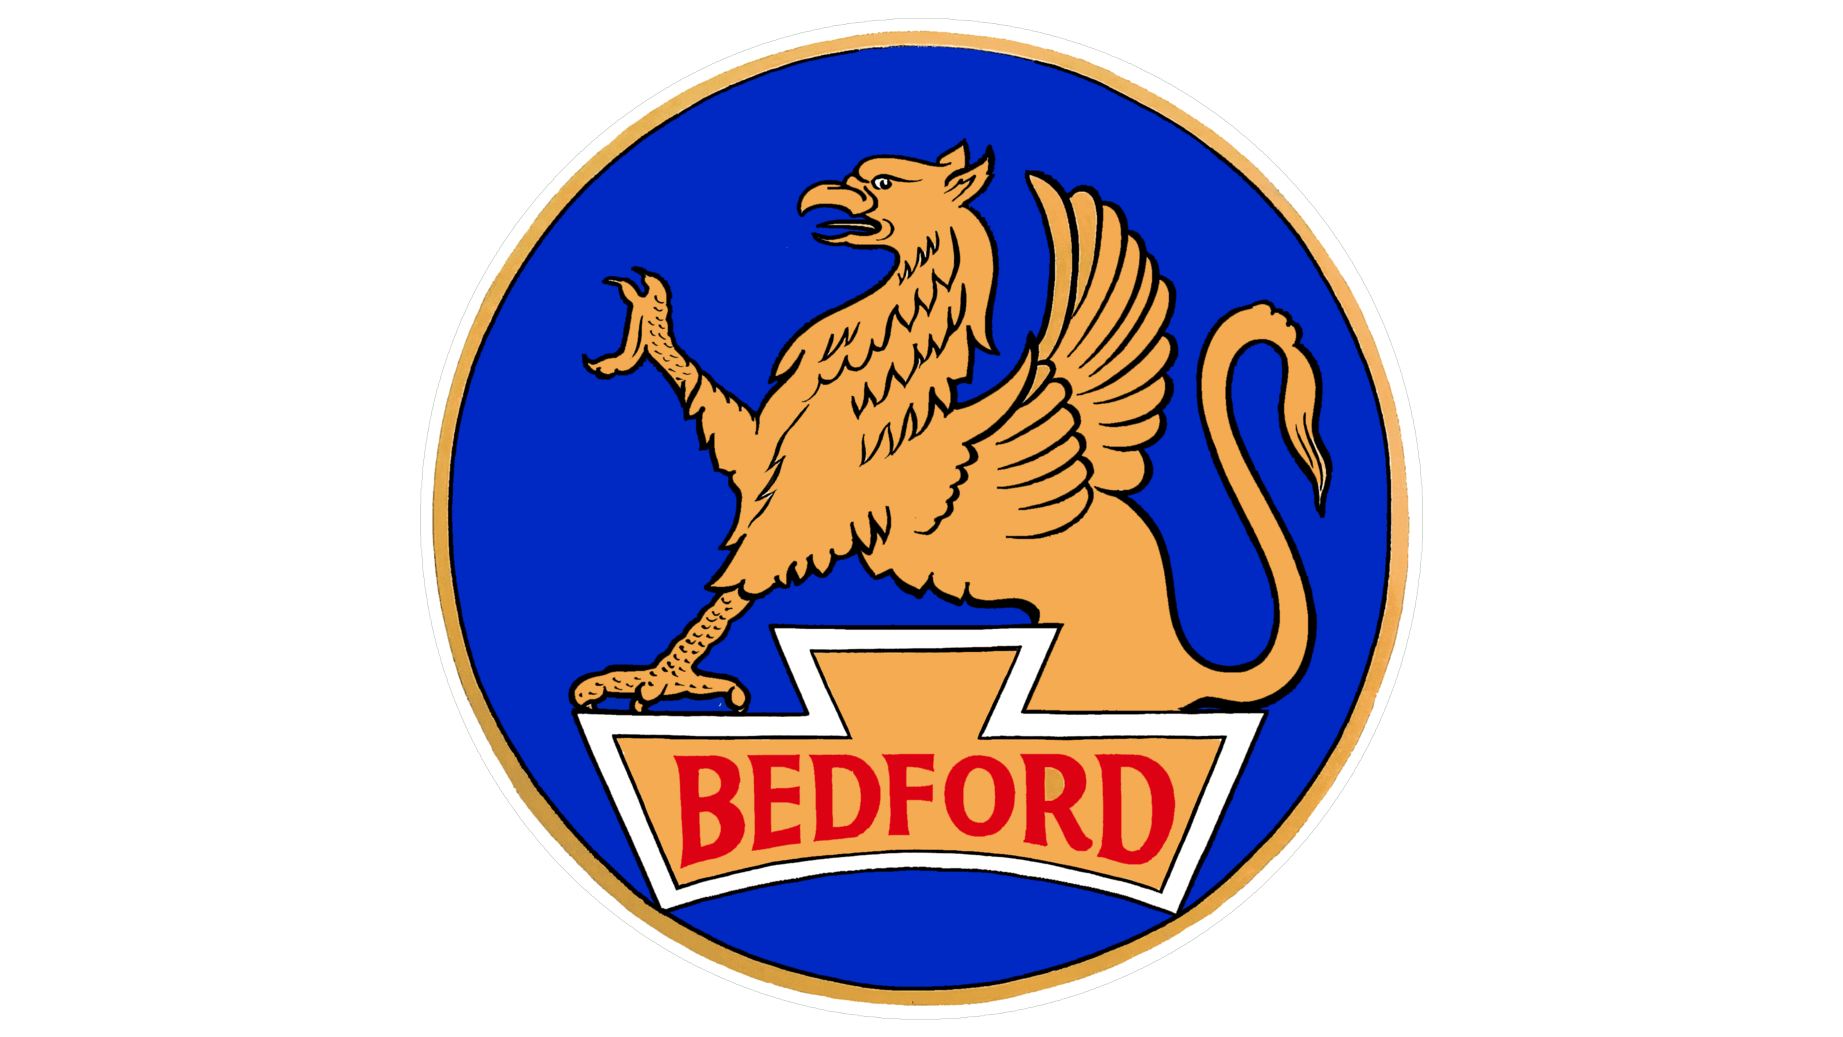 Bedford vehicles sign